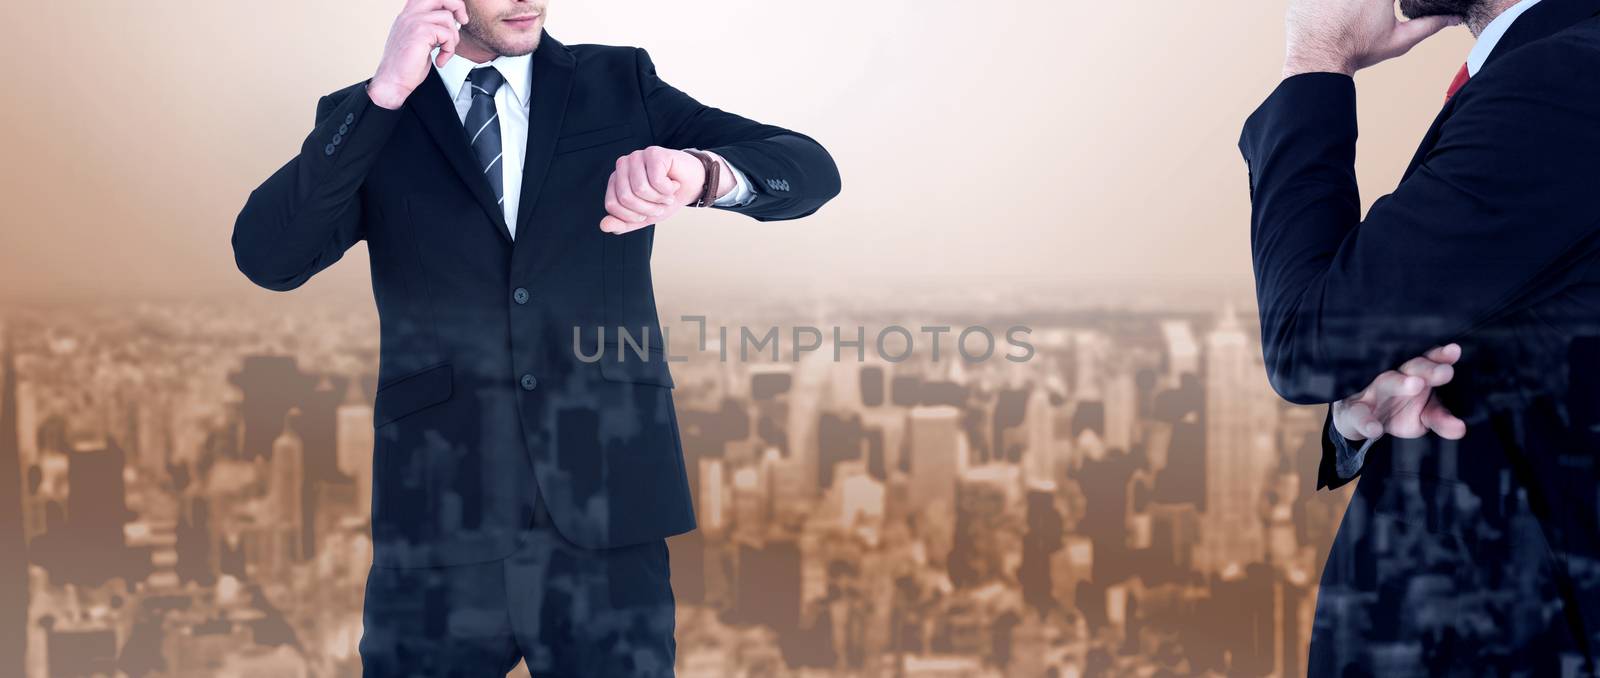 Composite image of serious businessman phoning while checking time by Wavebreakmedia